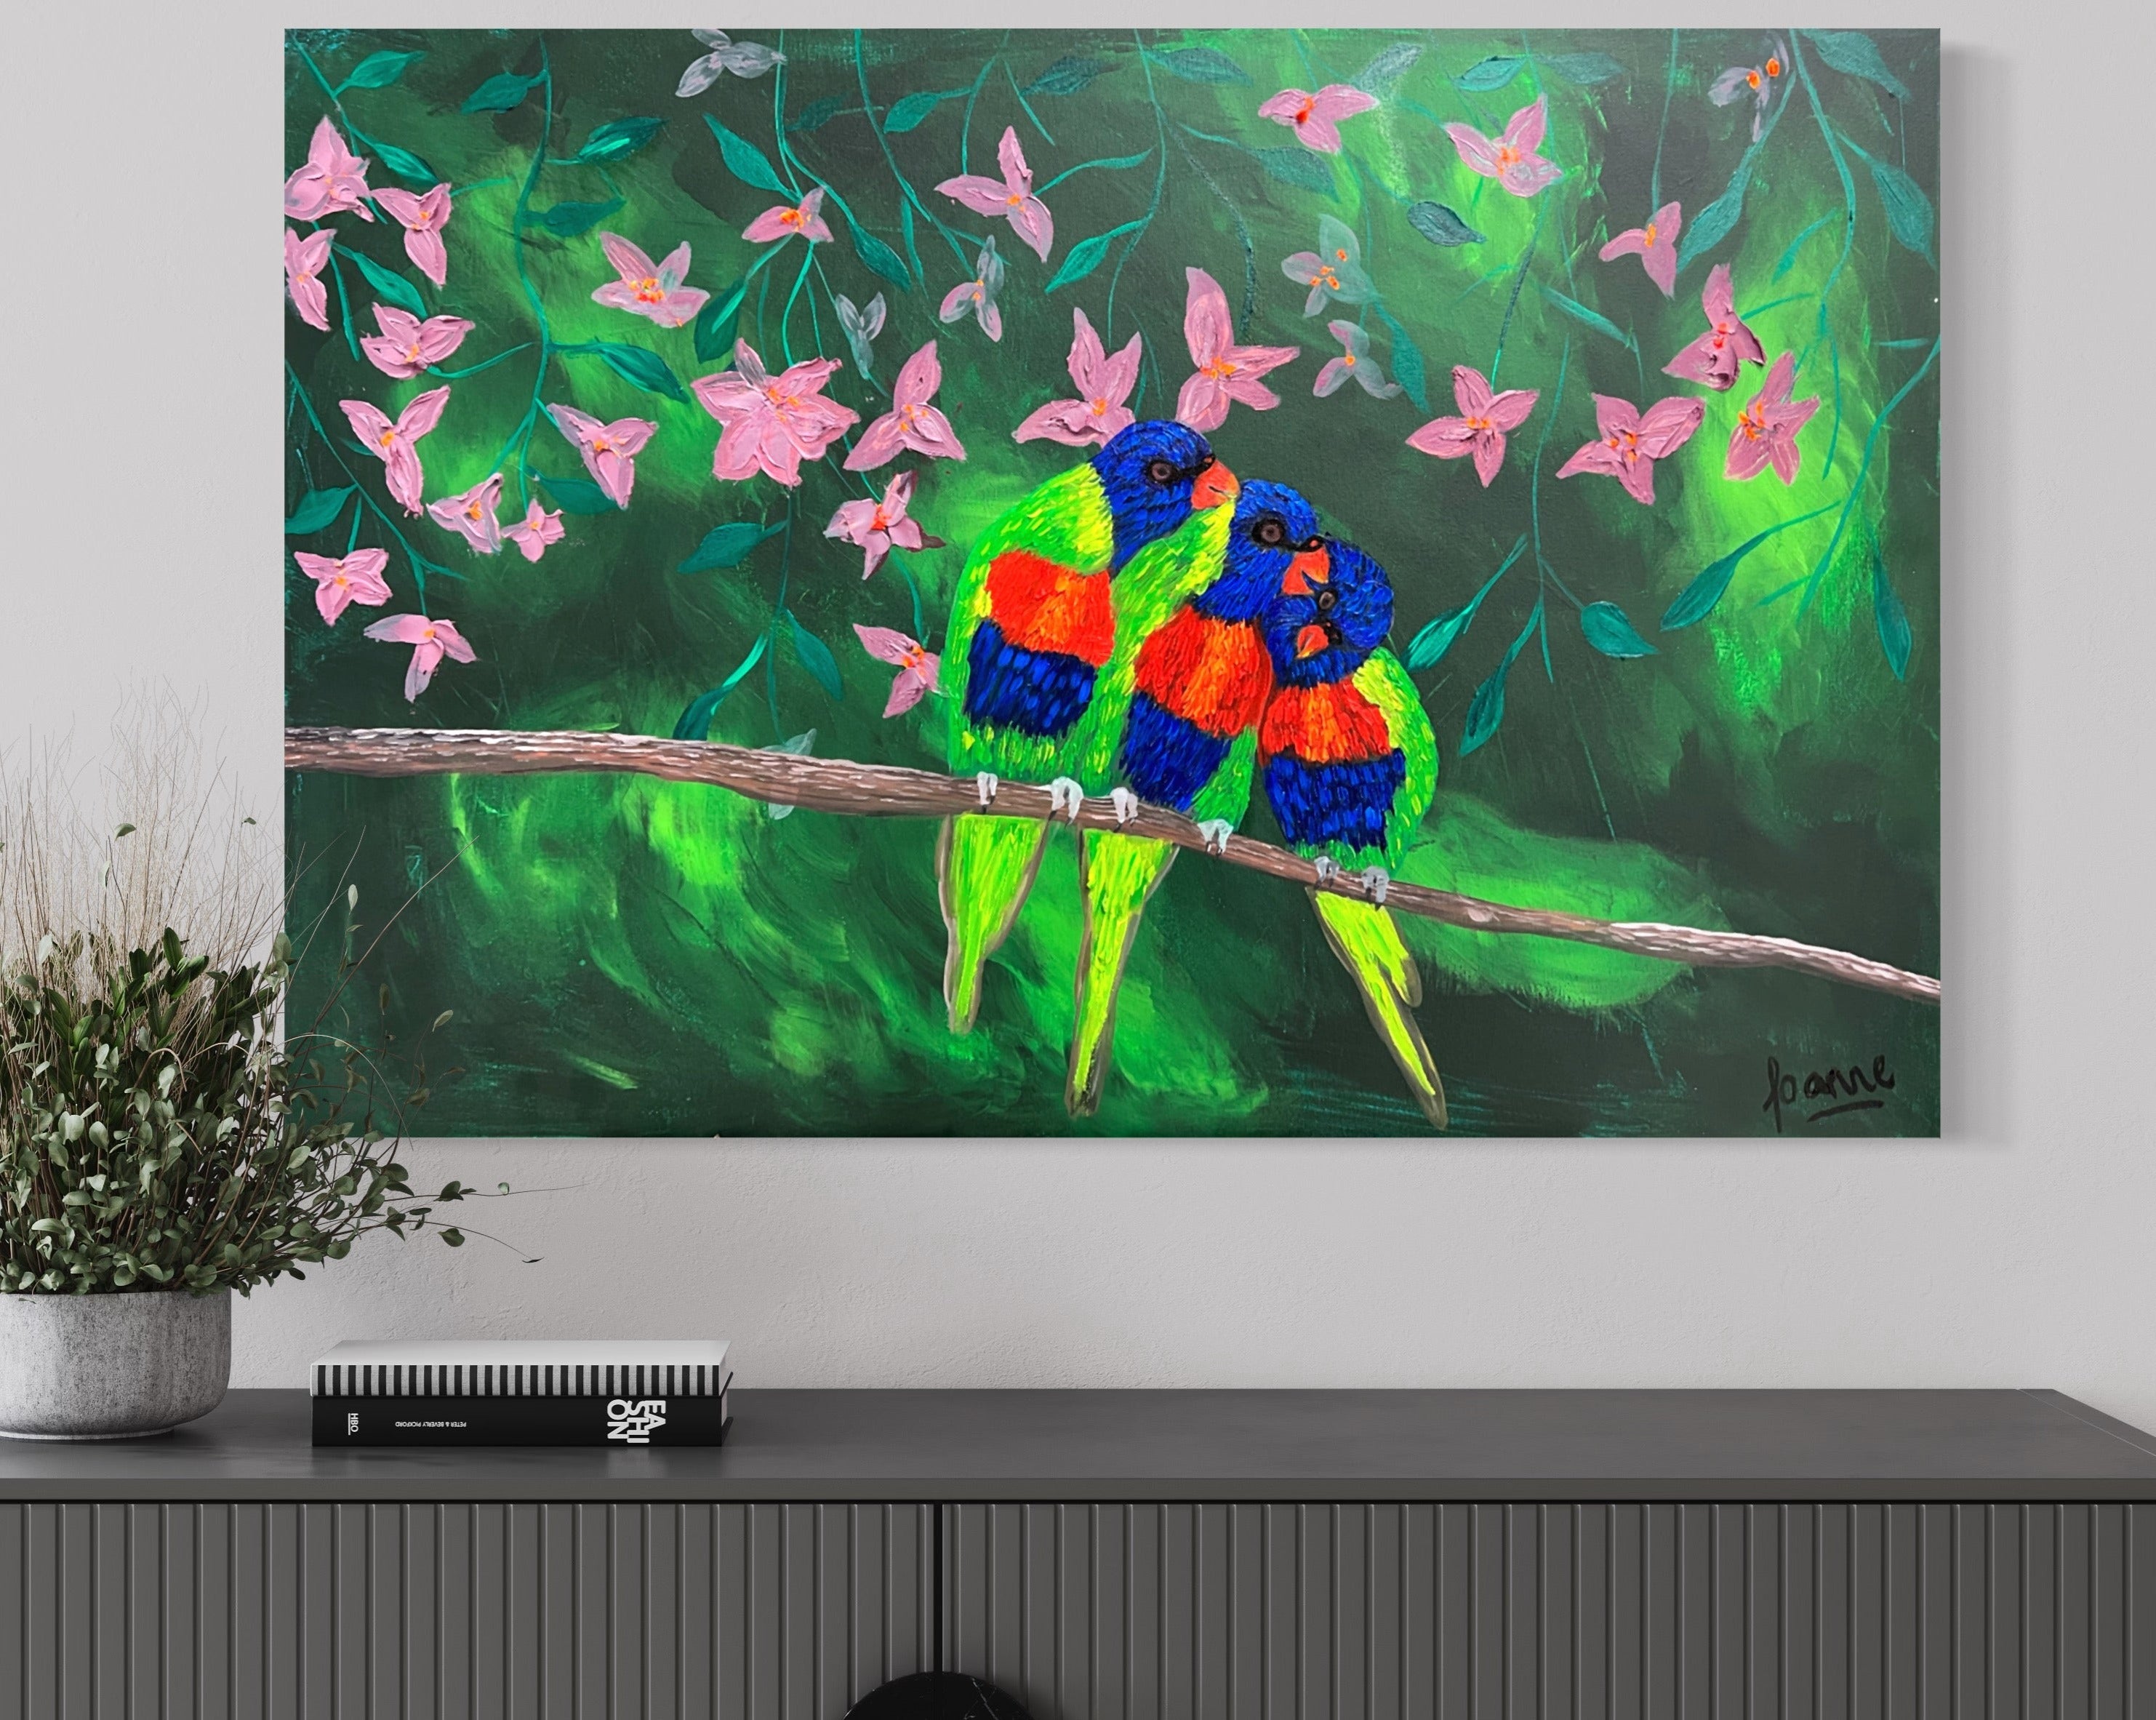 The Three Lorikeets (61 cm x 91 cm)Textured Abstract Painting by Joanne Daniel